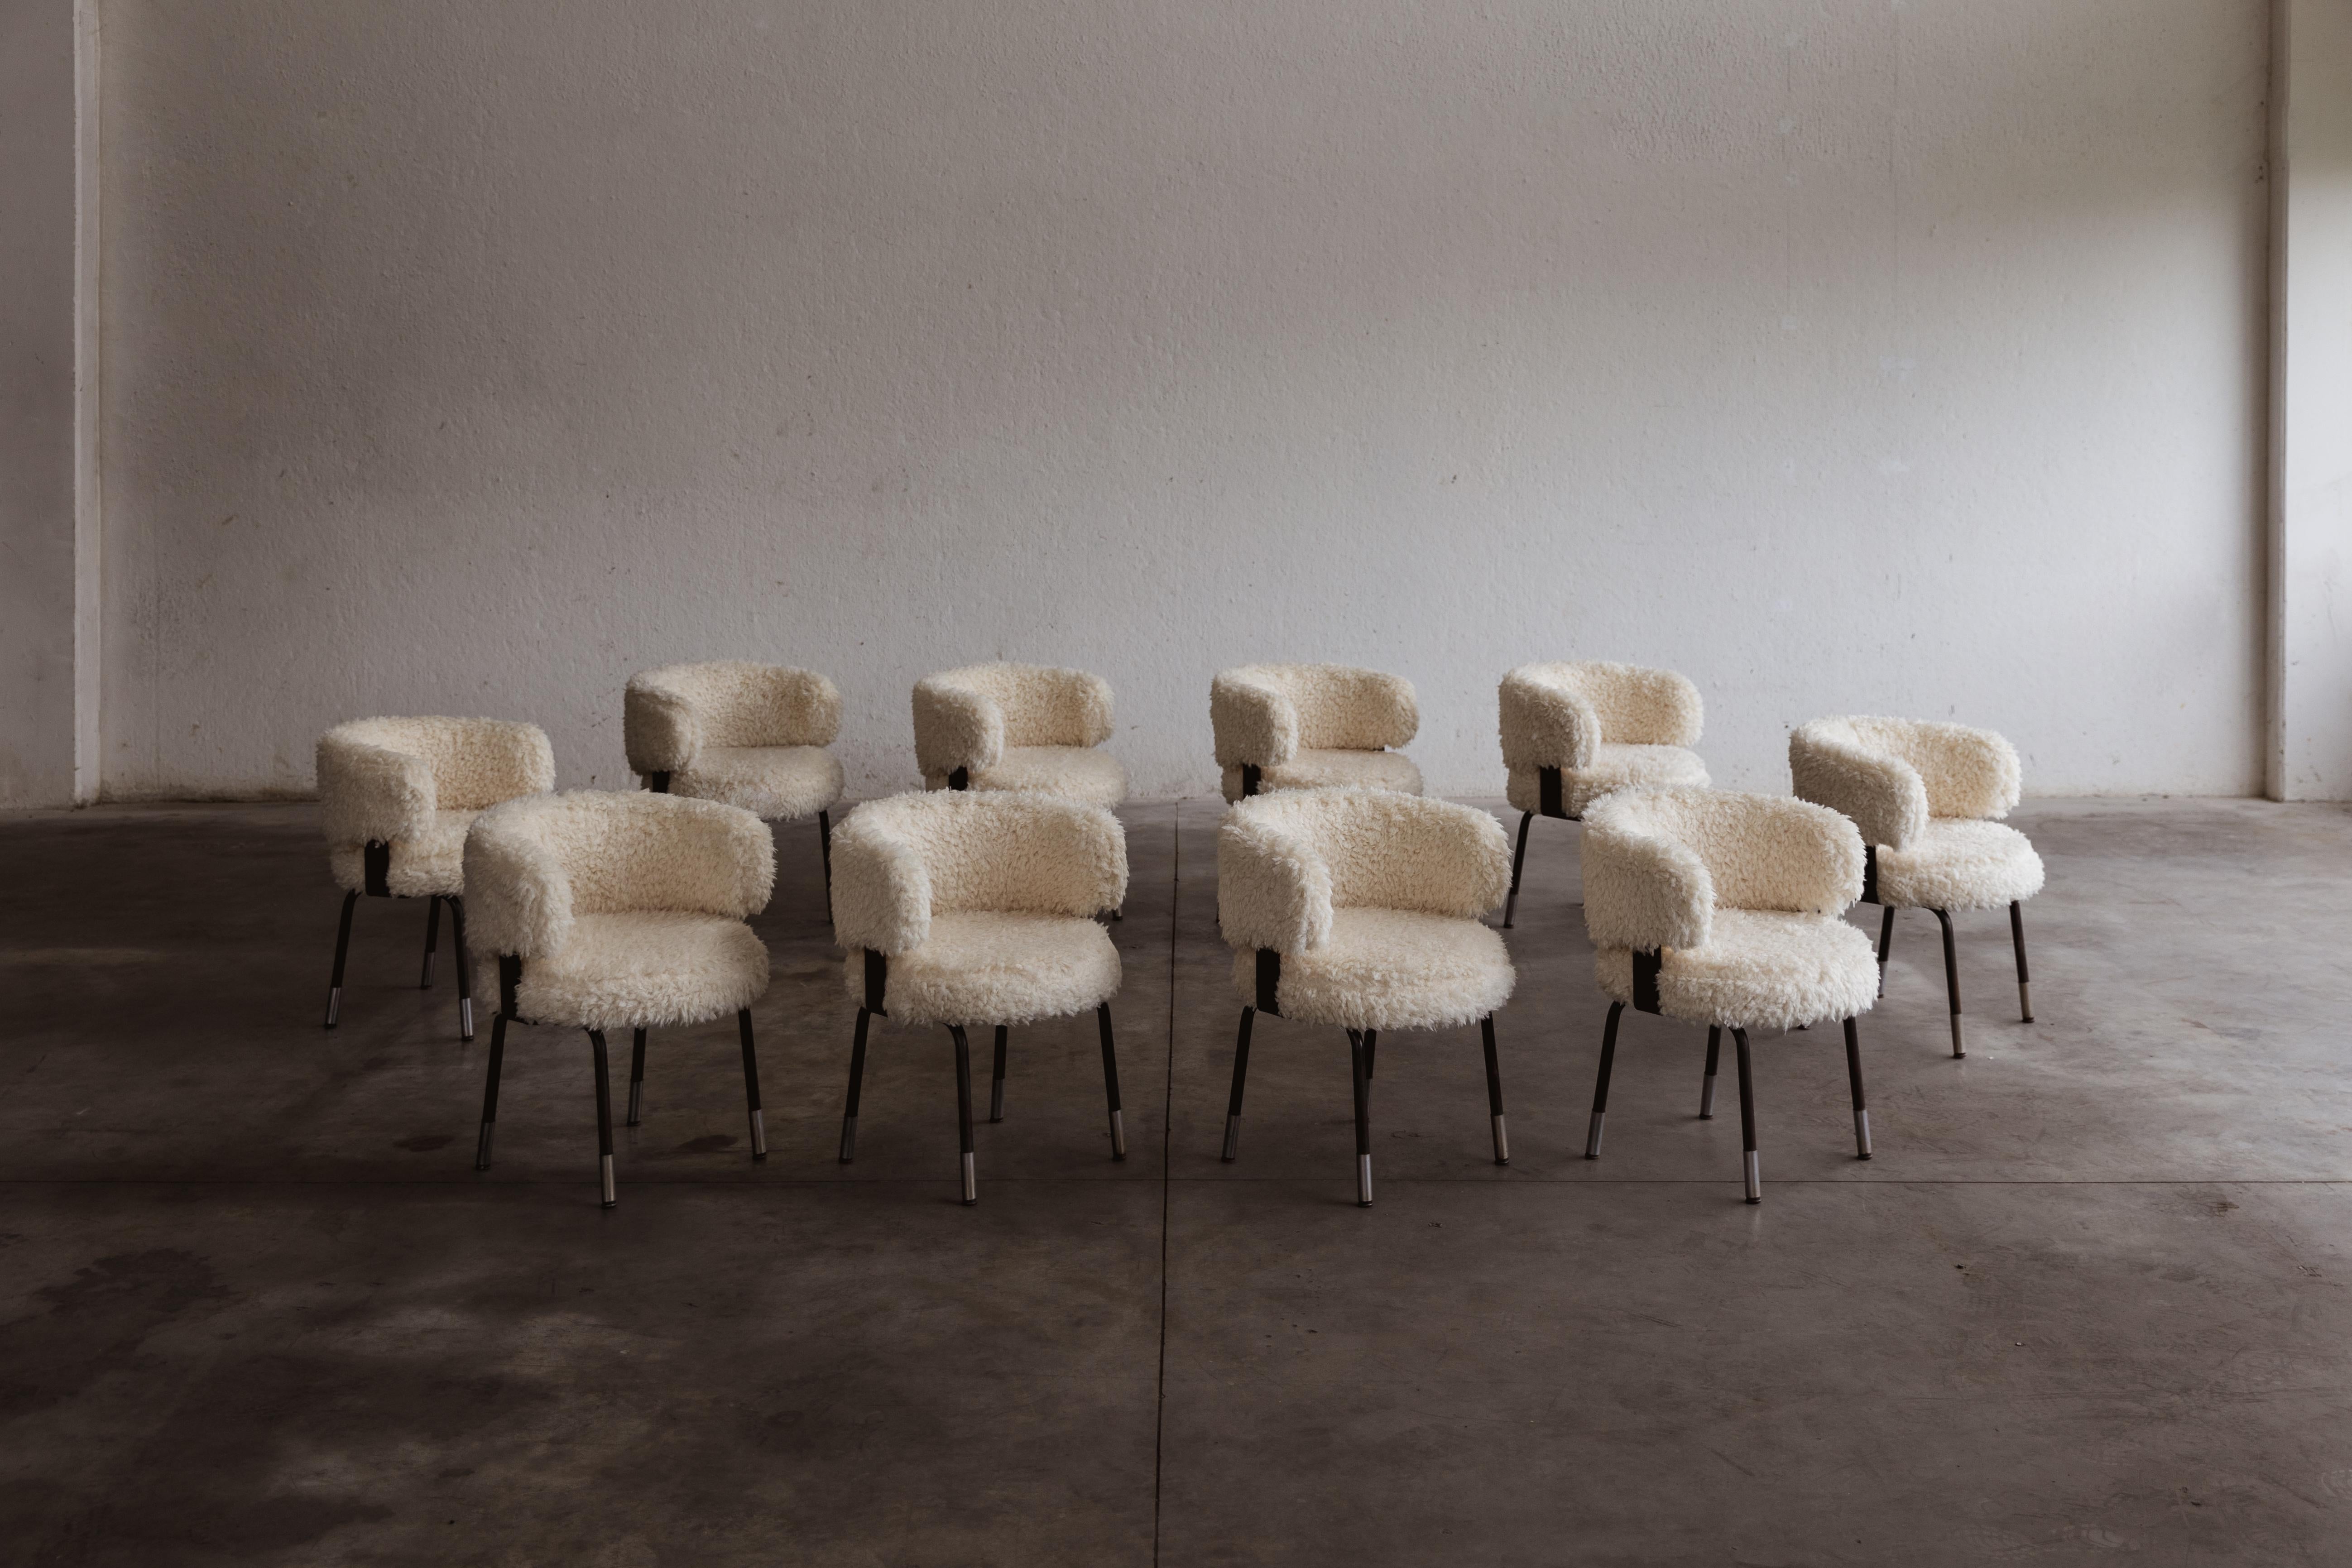 Gianni Moscatelli dining chairs for Formanova, faux-fur and iron, Italy, 1968, set of ten.

These chairs represent timeless items designed by Gianni Moscatelli for Formanova in the 1960's. Its design features pure and functional lines, enhanced by